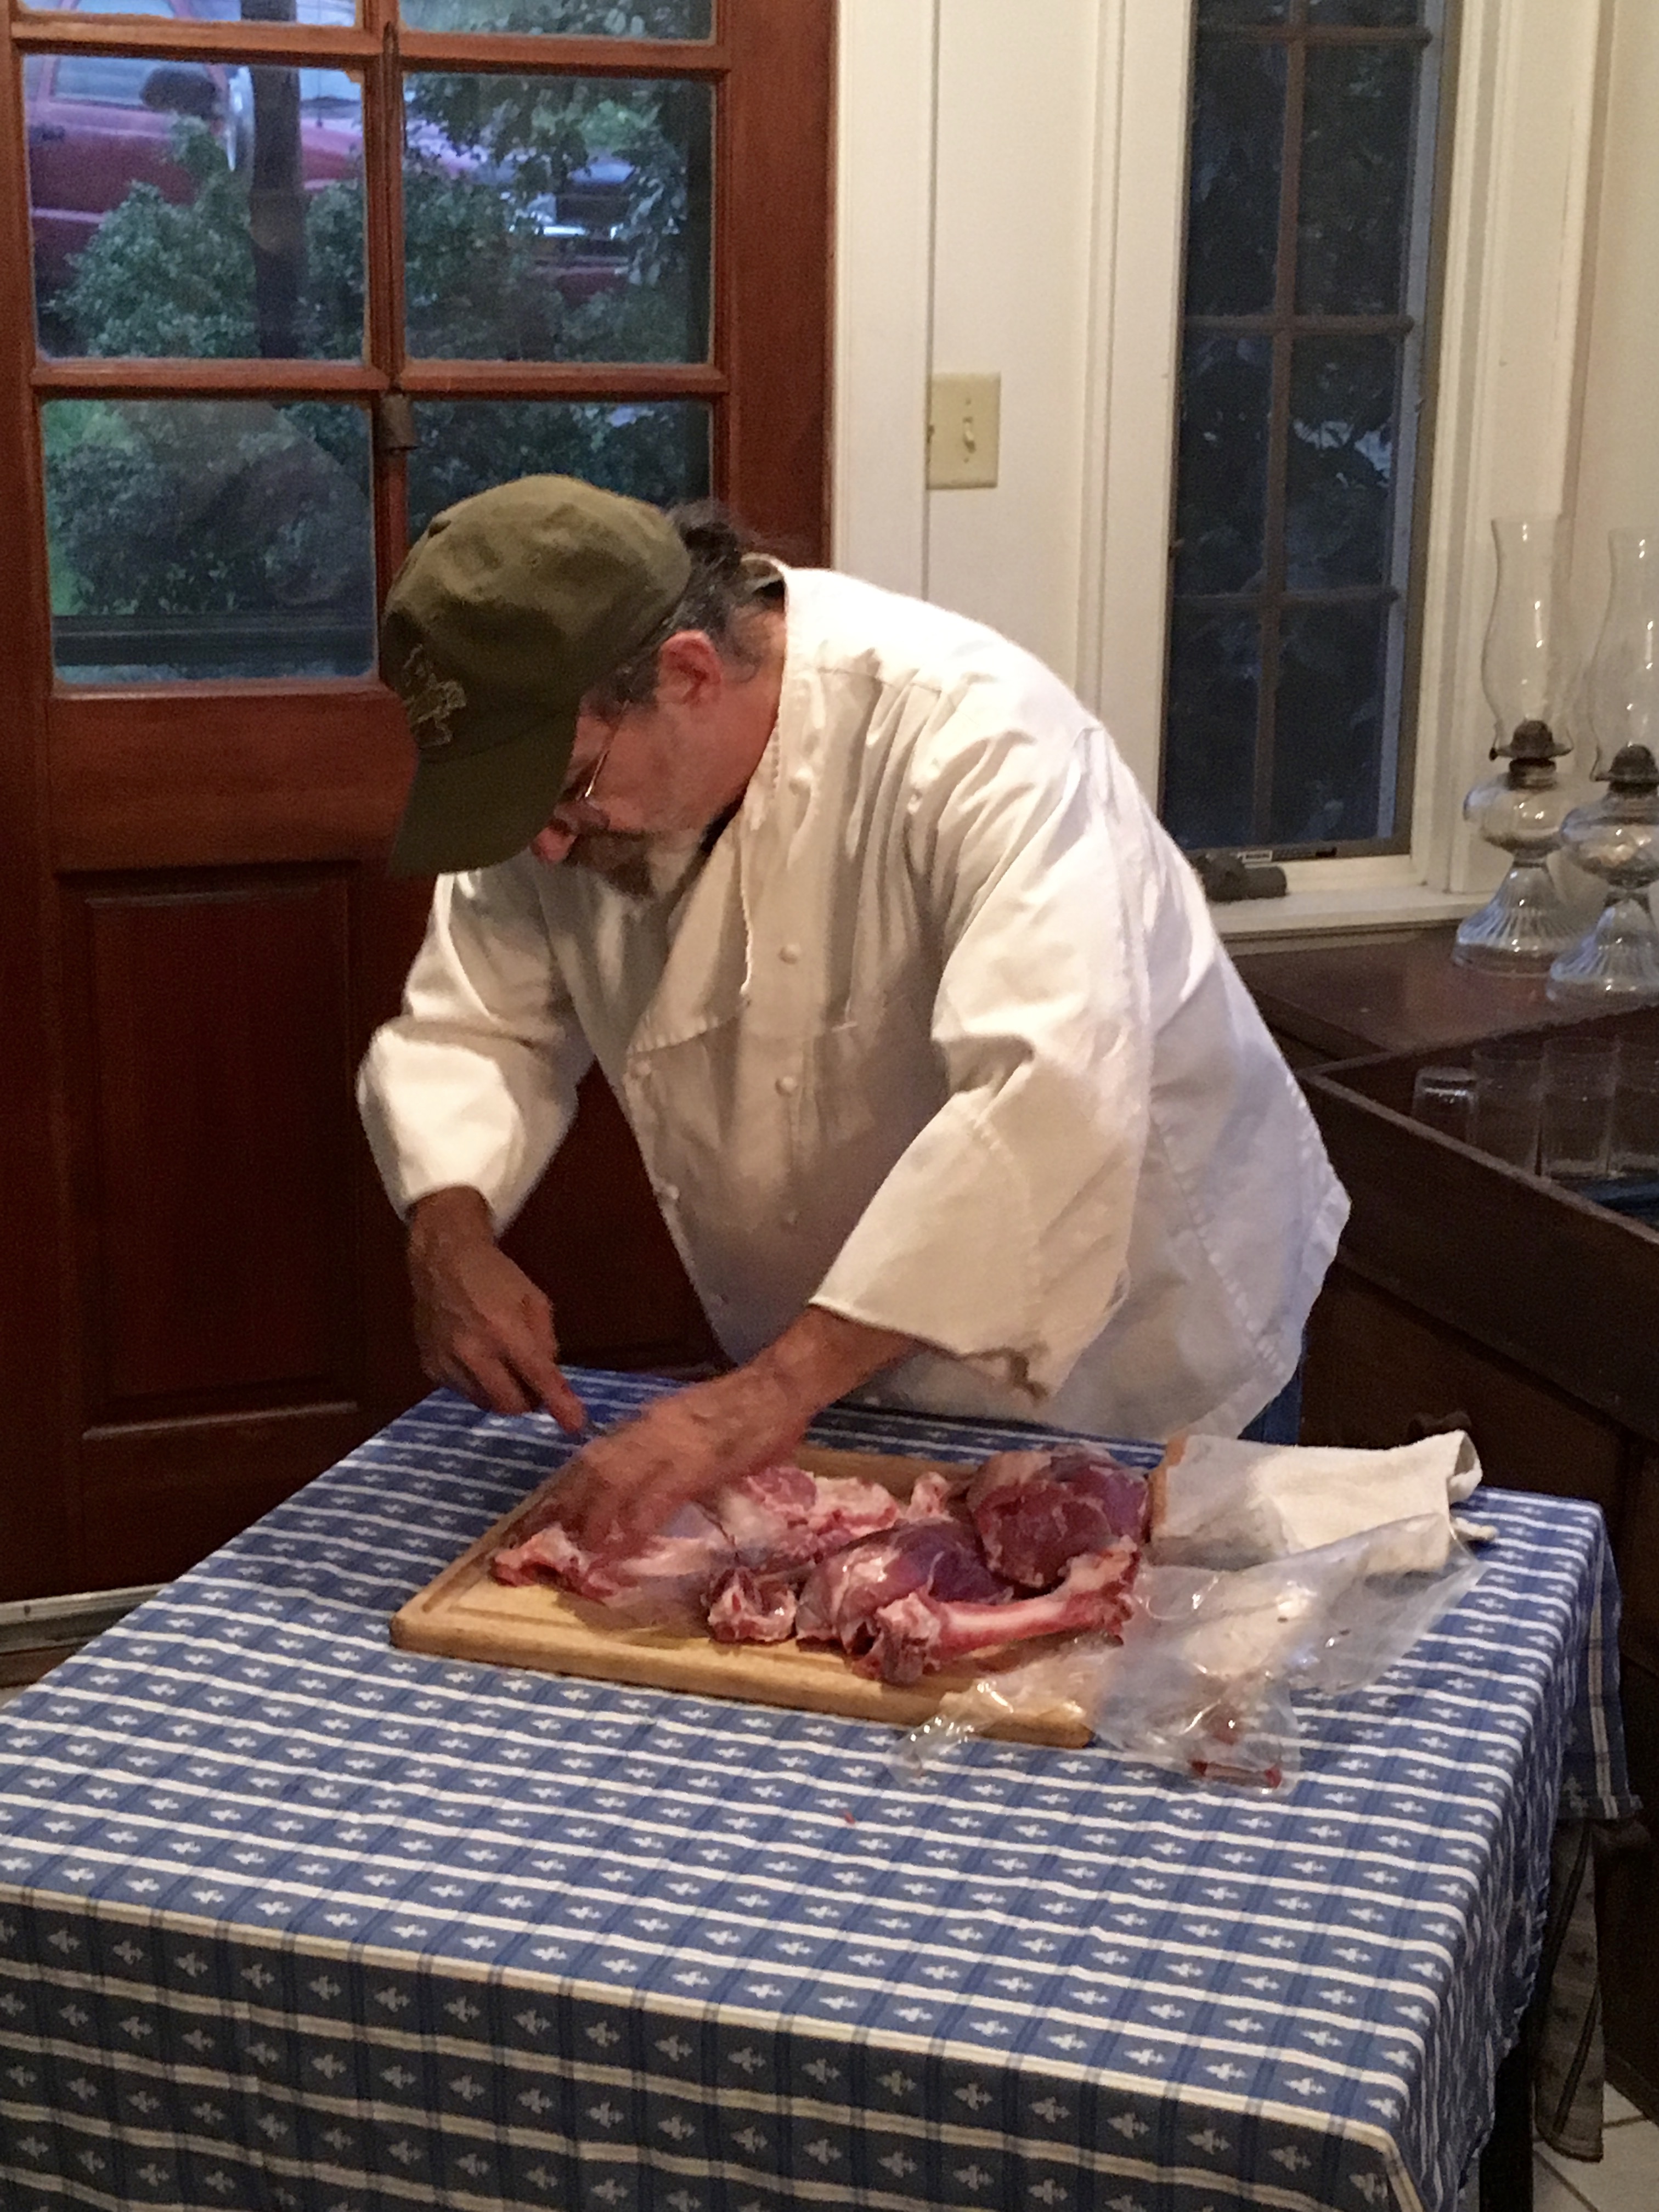 Demonstration of carving cuts from an upper leg of lamb